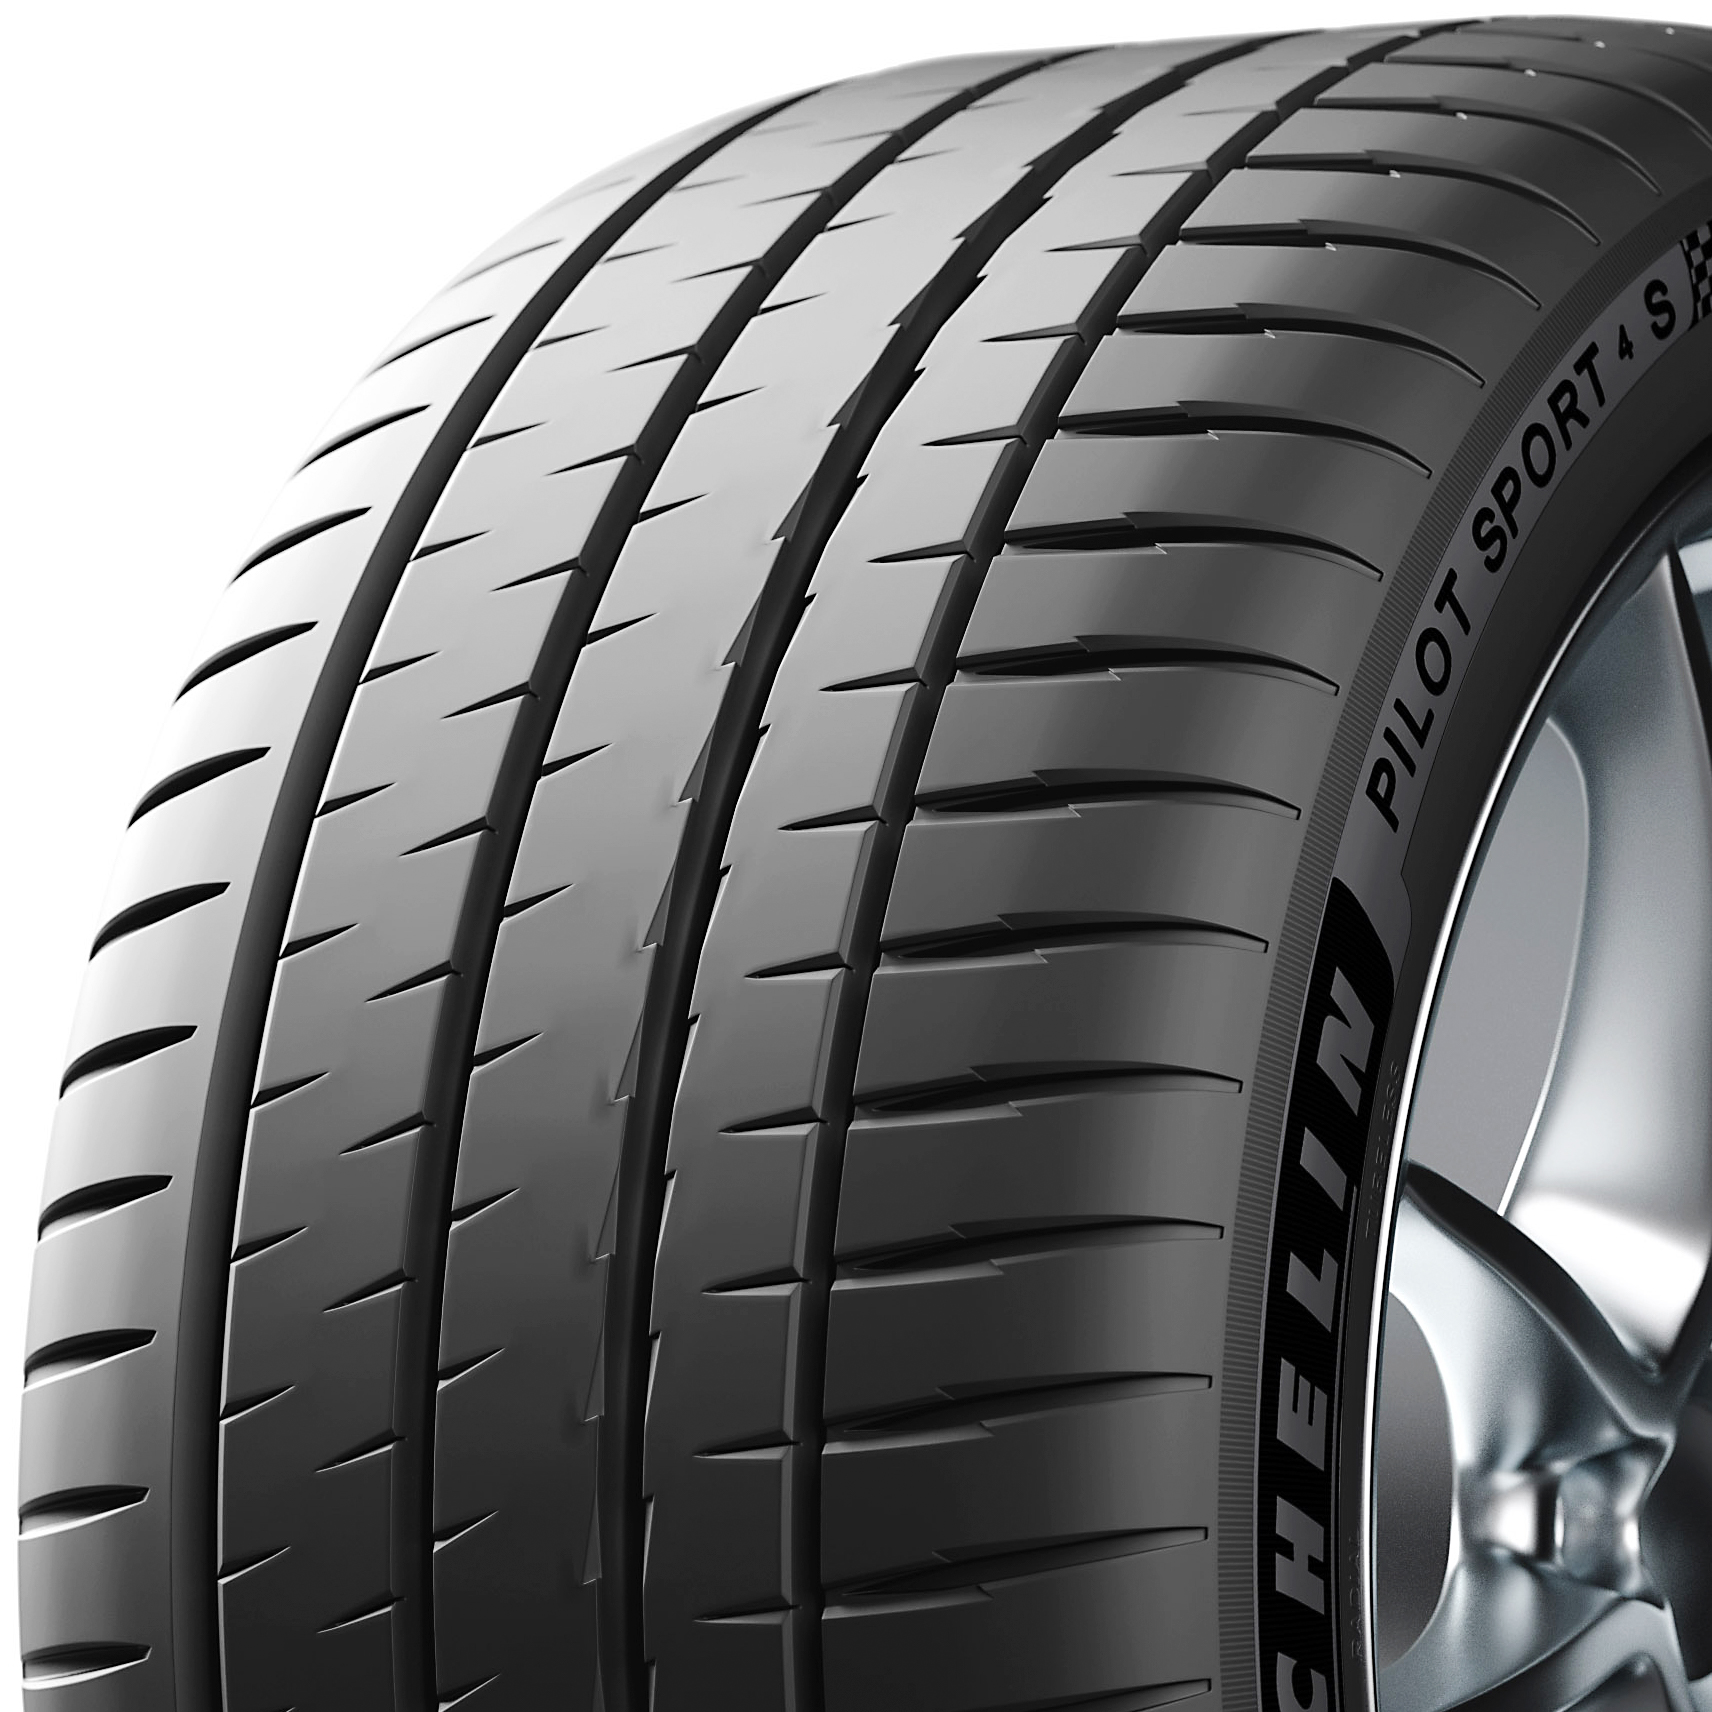 Michelin Pilot Sport 4 S - Reviews and tests 2022 | TheTireLab.com